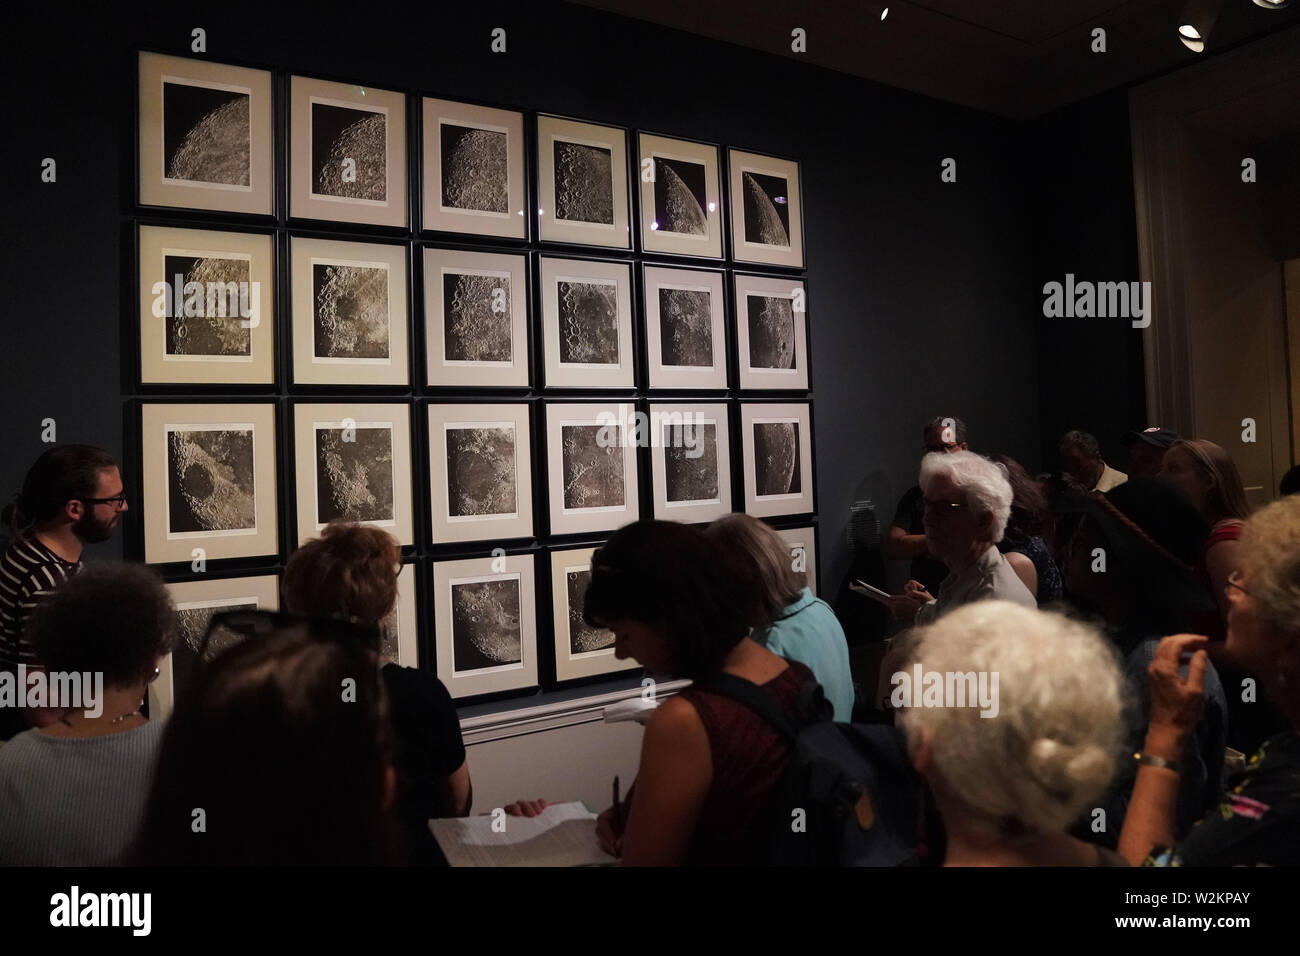 Washington, USA. 9th July, 2019. Visitors view 'Photographic and Systematic Chart of the Moon' exhibited during a preview of 'By the Light of the Silvery Moon: A Century of Lunar Photographs' at the National Gallery of Art in Washington, DC, the United States, on July 9, 2019. Some 50 works including a selection of photographs will be displayed in the exhibition lasting from July 14, 2019 through Jan. 5, 2020 to mark the 50th anniversary of the Apollo 11 moon landing. Credit: Liu Jie/Xinhua/Alamy Live News Stock Photo